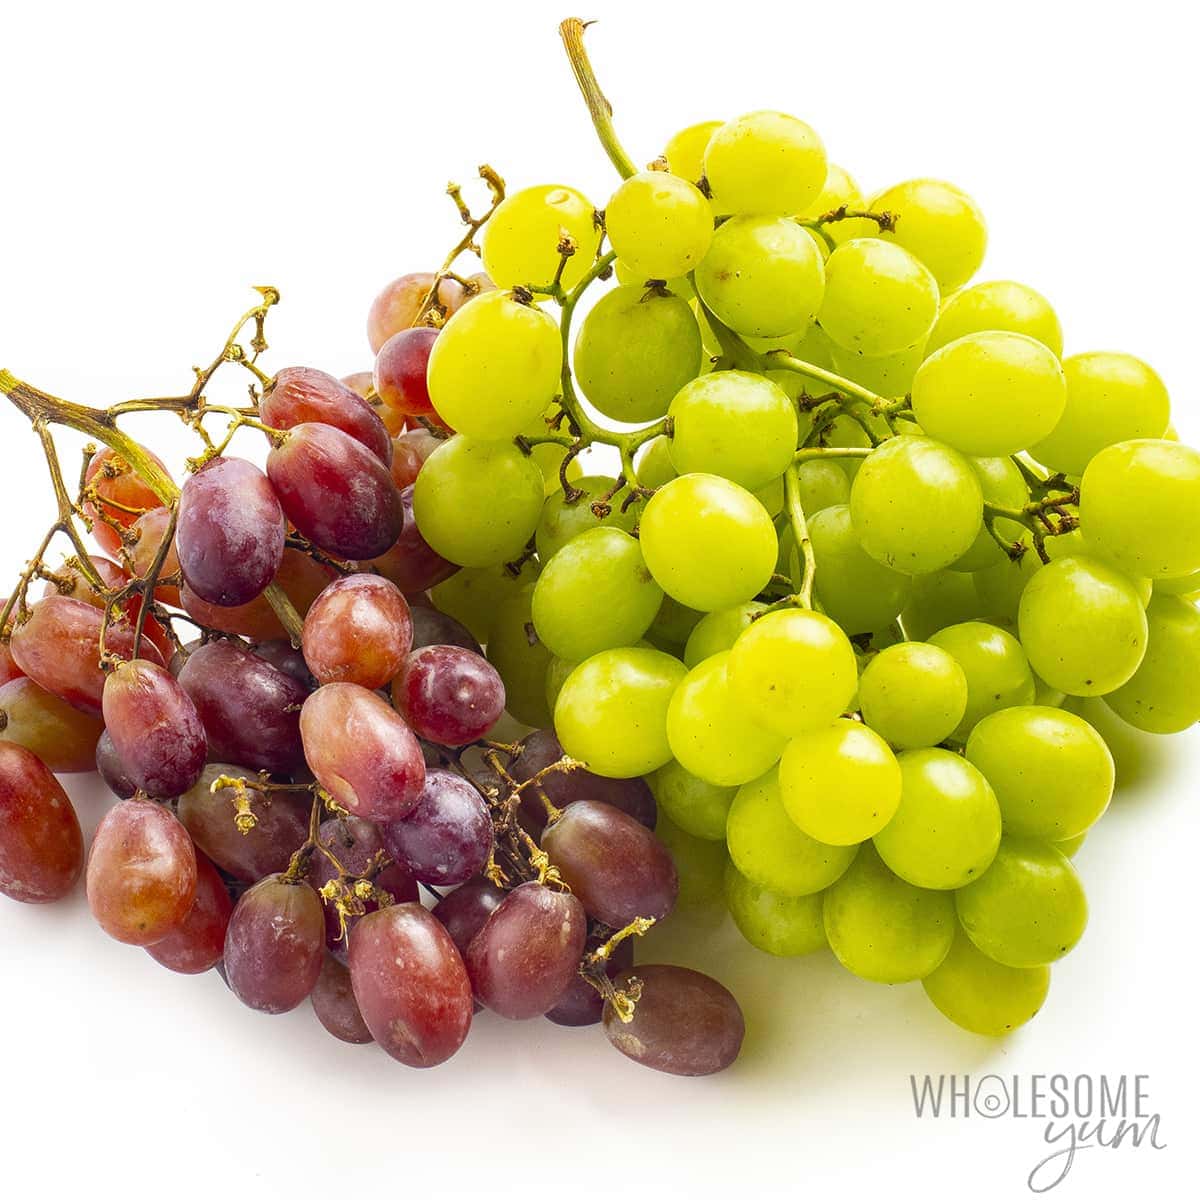 Are grapes keto, or are carbs in grapes too high? These red and green grapes are not very low in carbs.